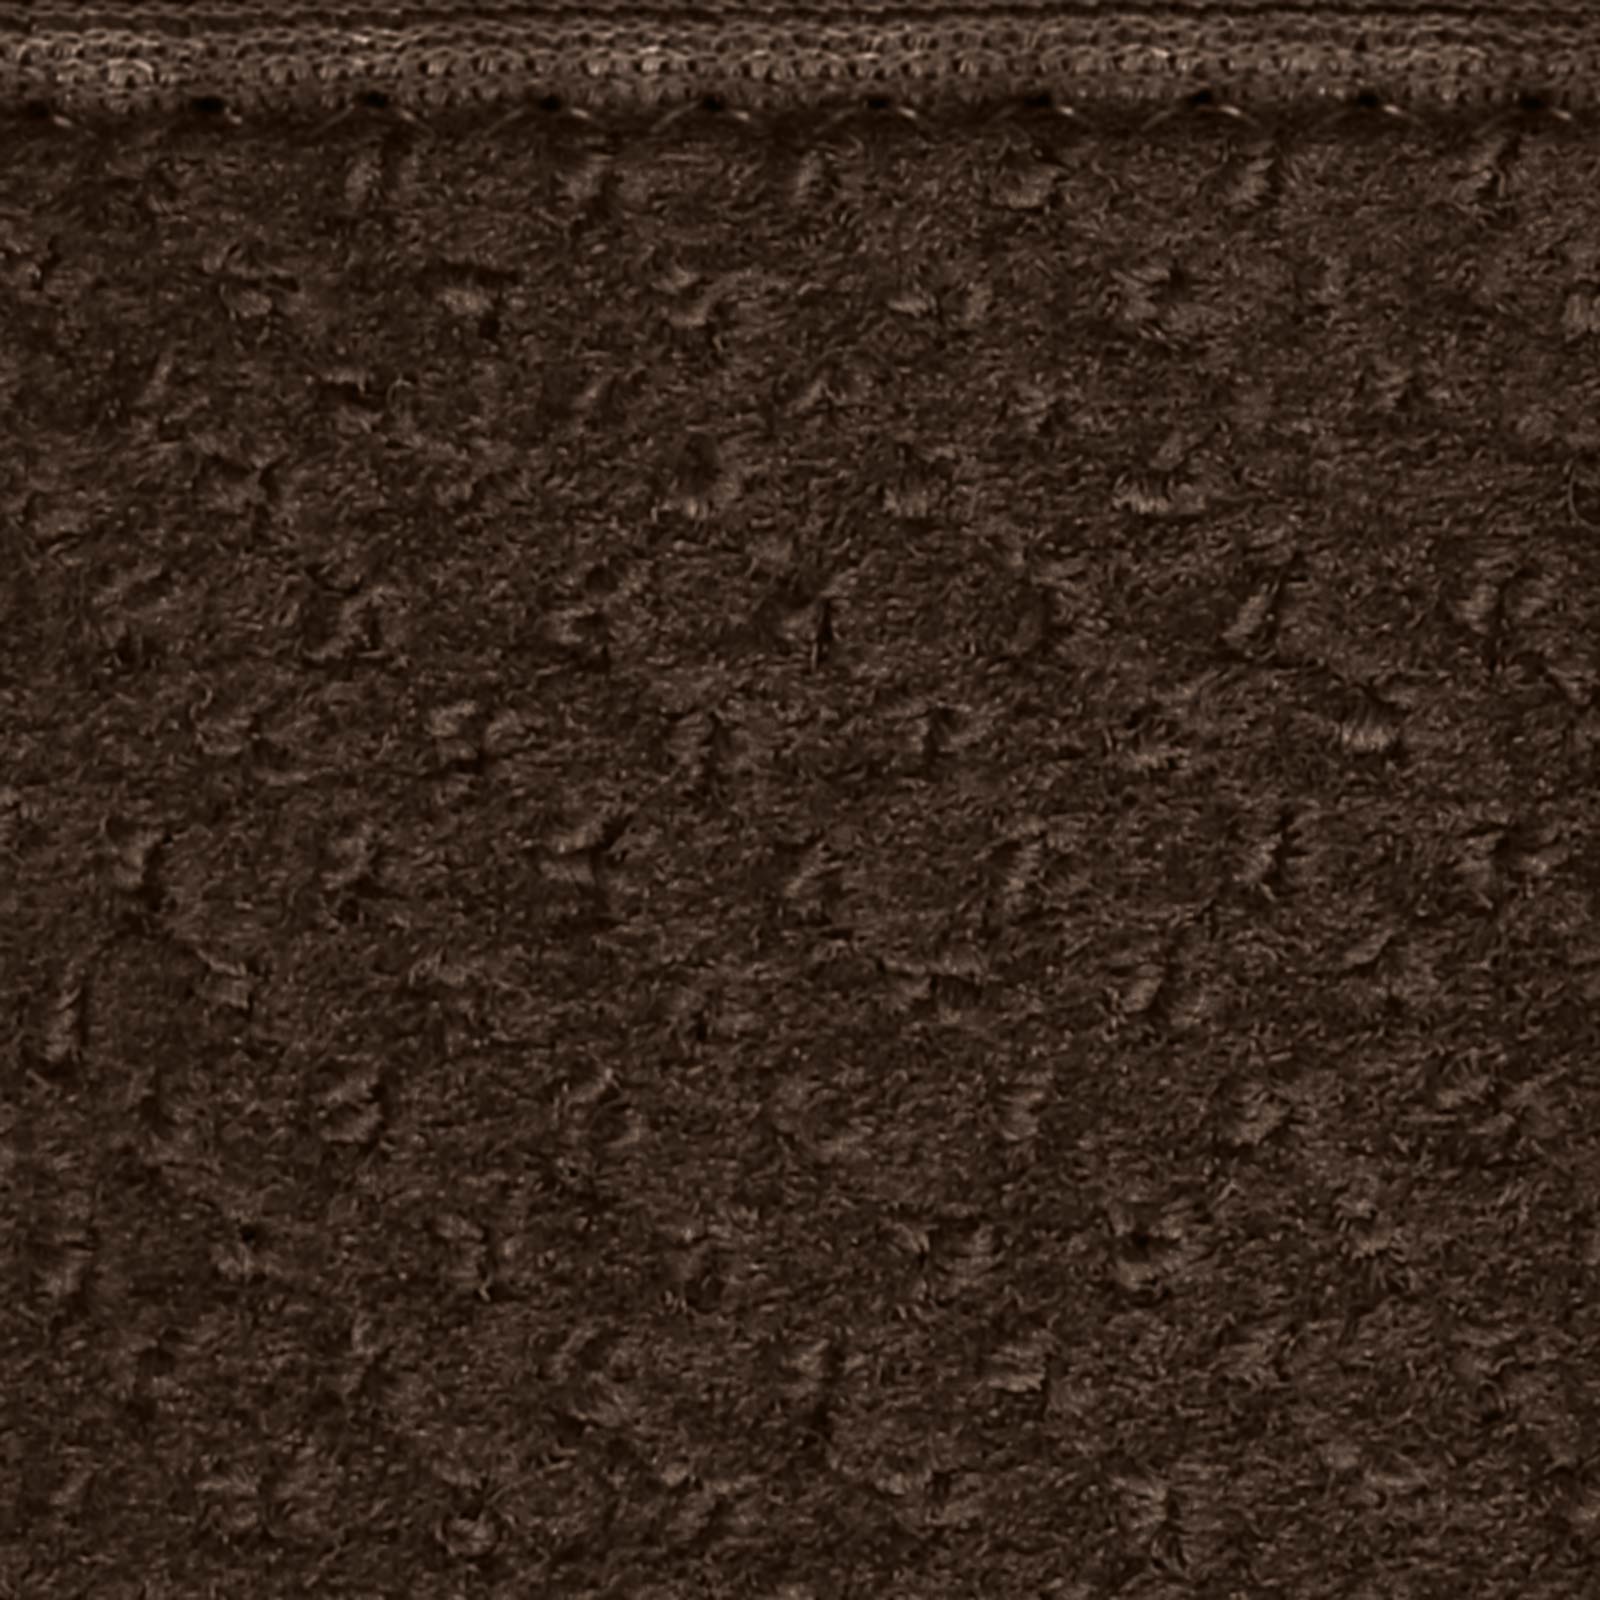 House, Home and More House, Home and More Skid-resistant Carpet Runner -  Chocolate Brown - 8 Ft. X 48 In.